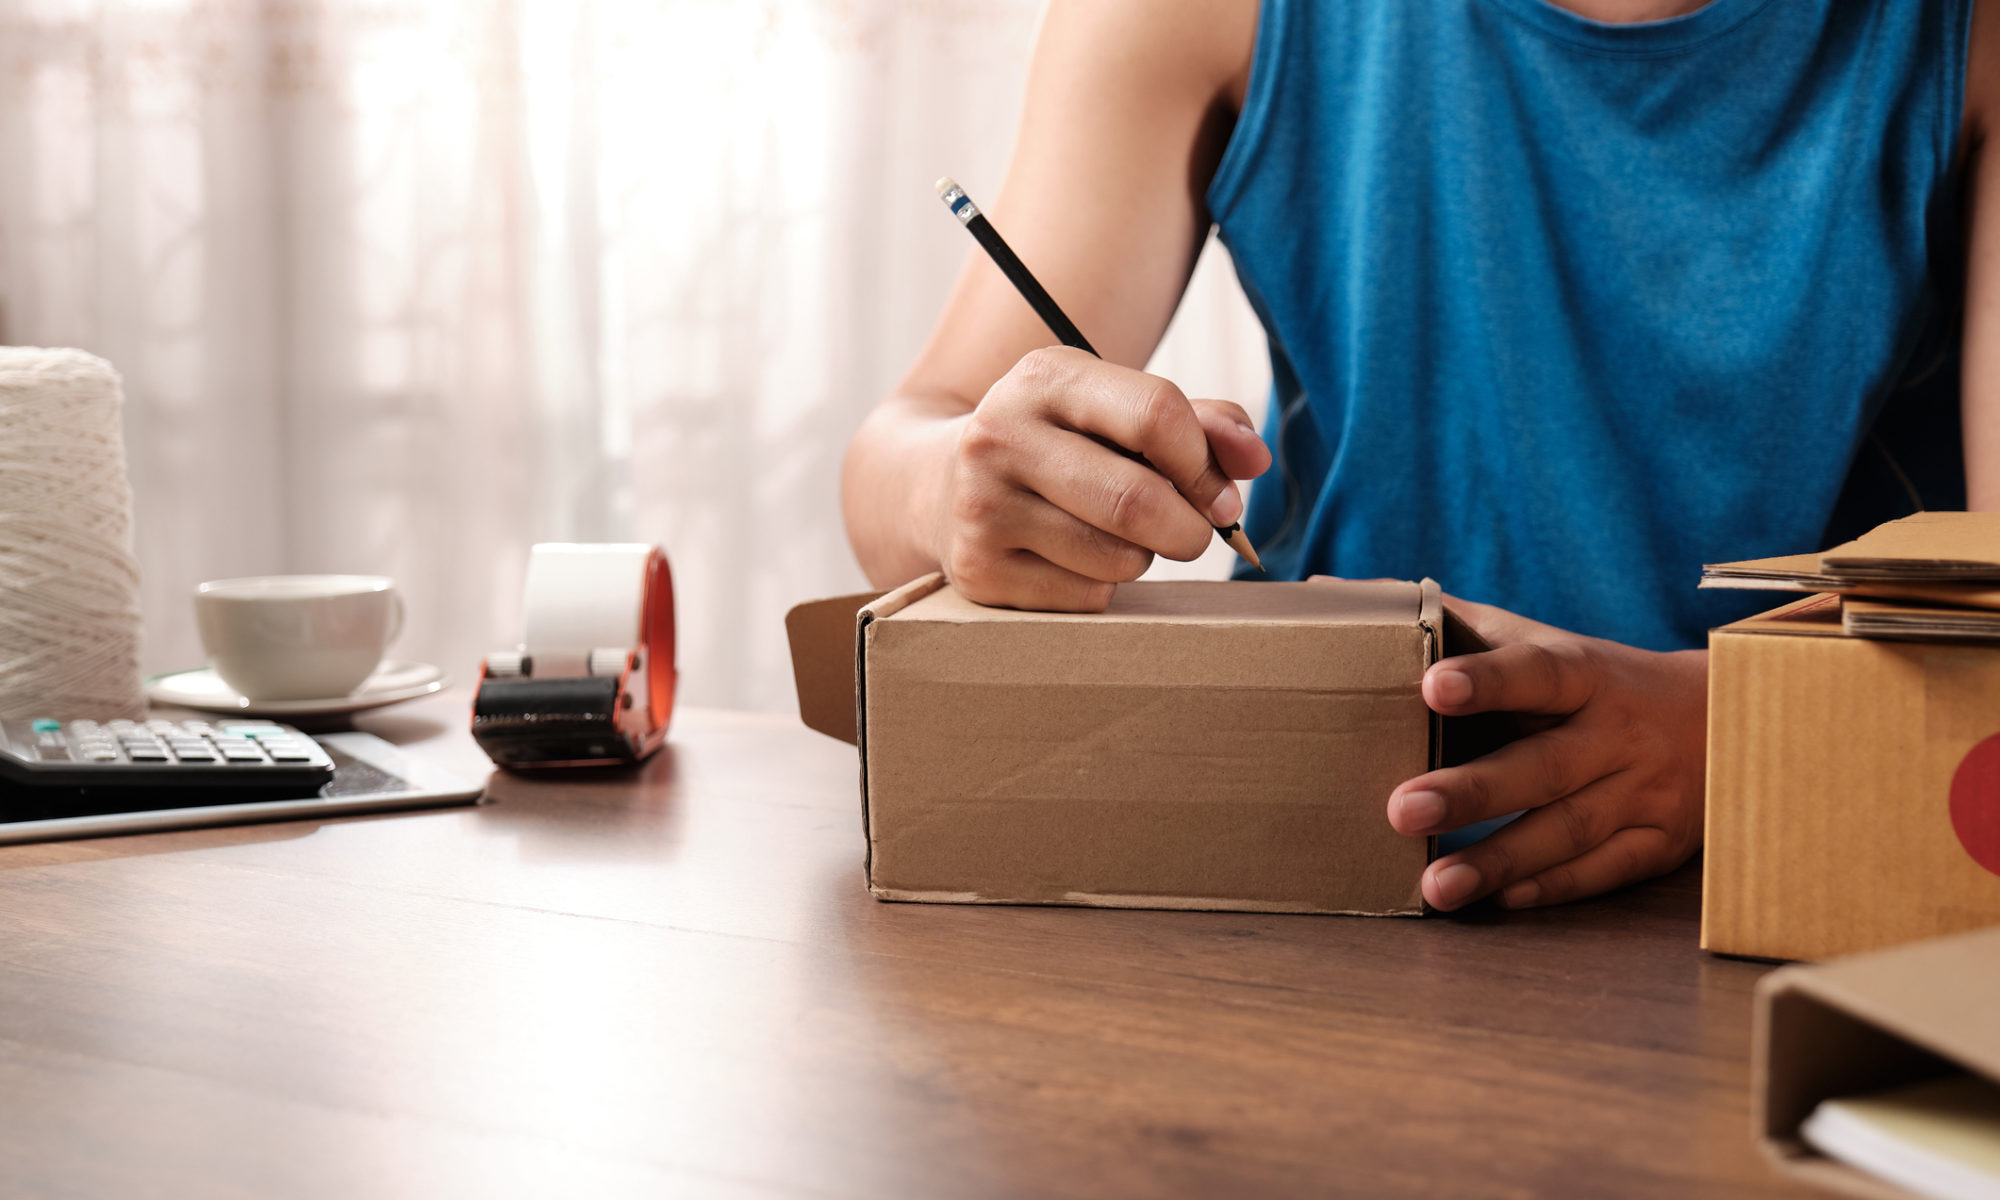 Online store owner writing an address on a package